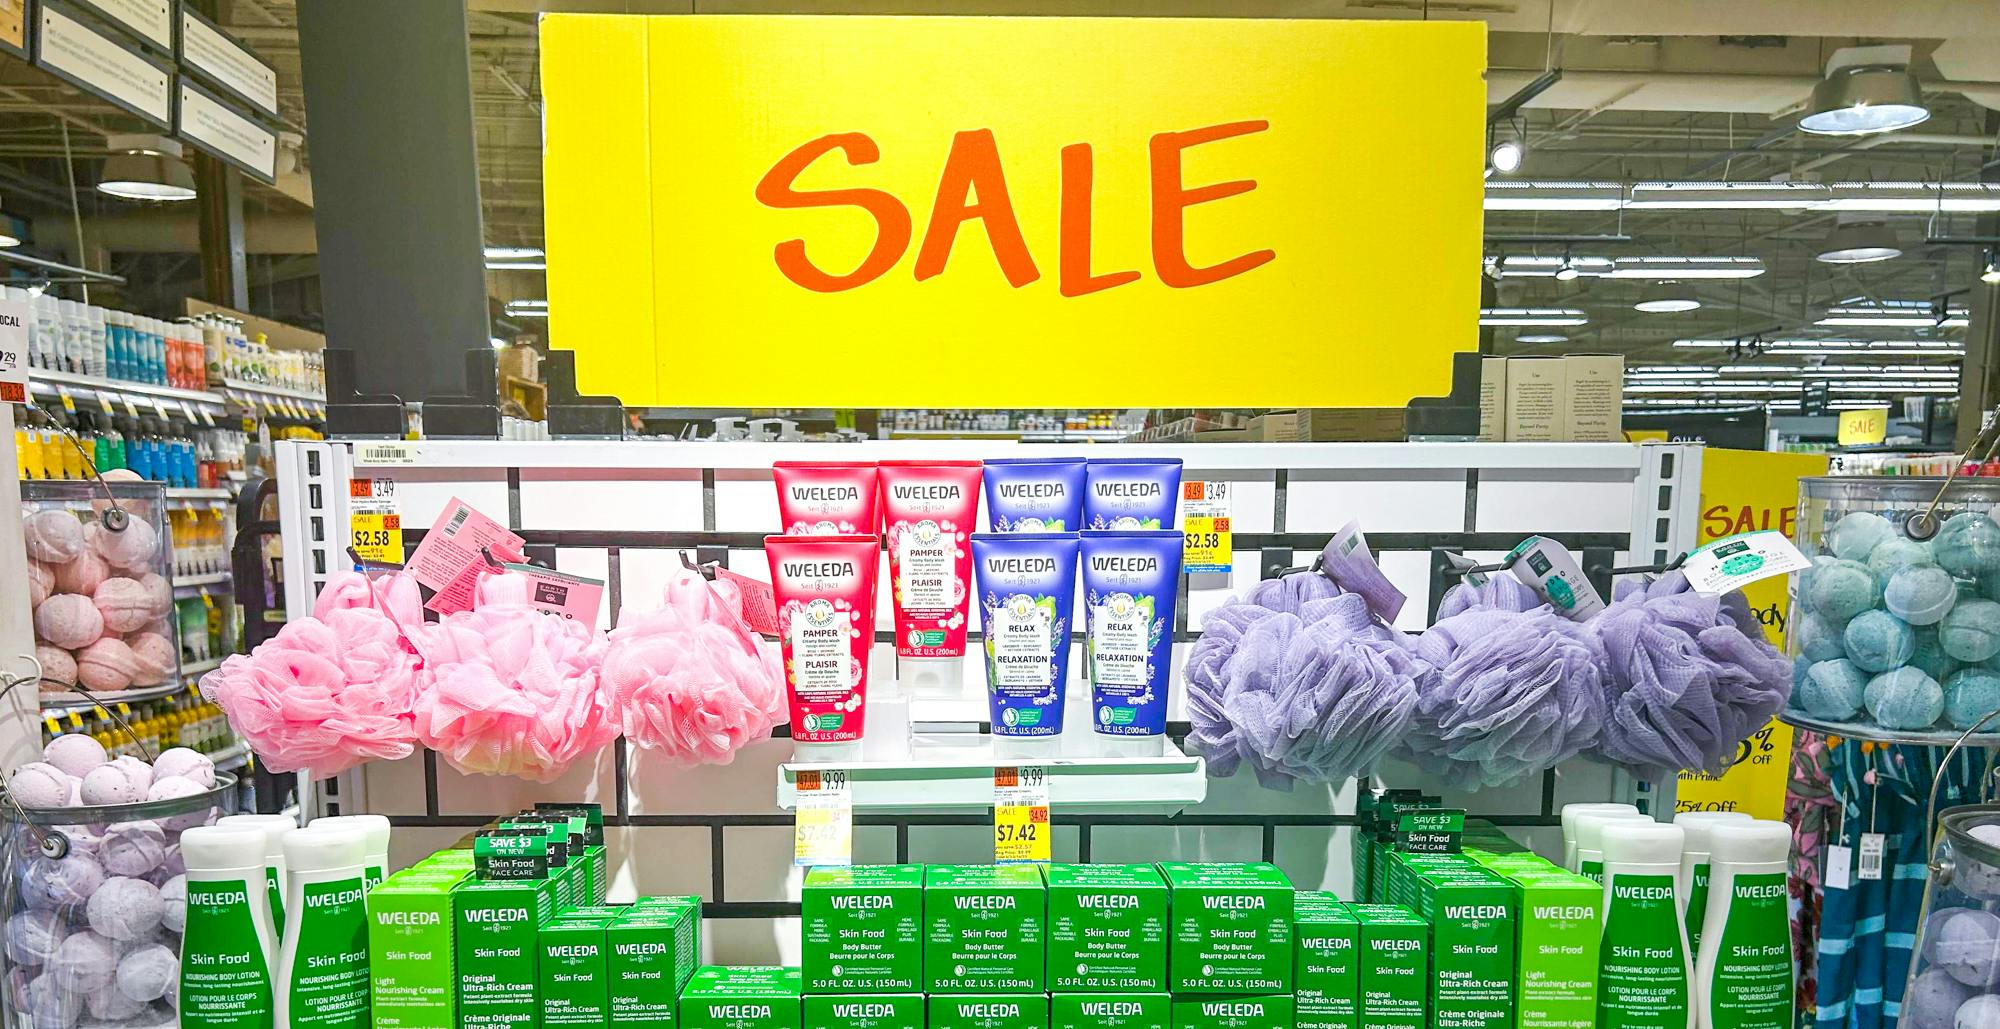 Whole Foods Beauty Week Is Now a TwoWeek Sale May 3 16, 2023 The